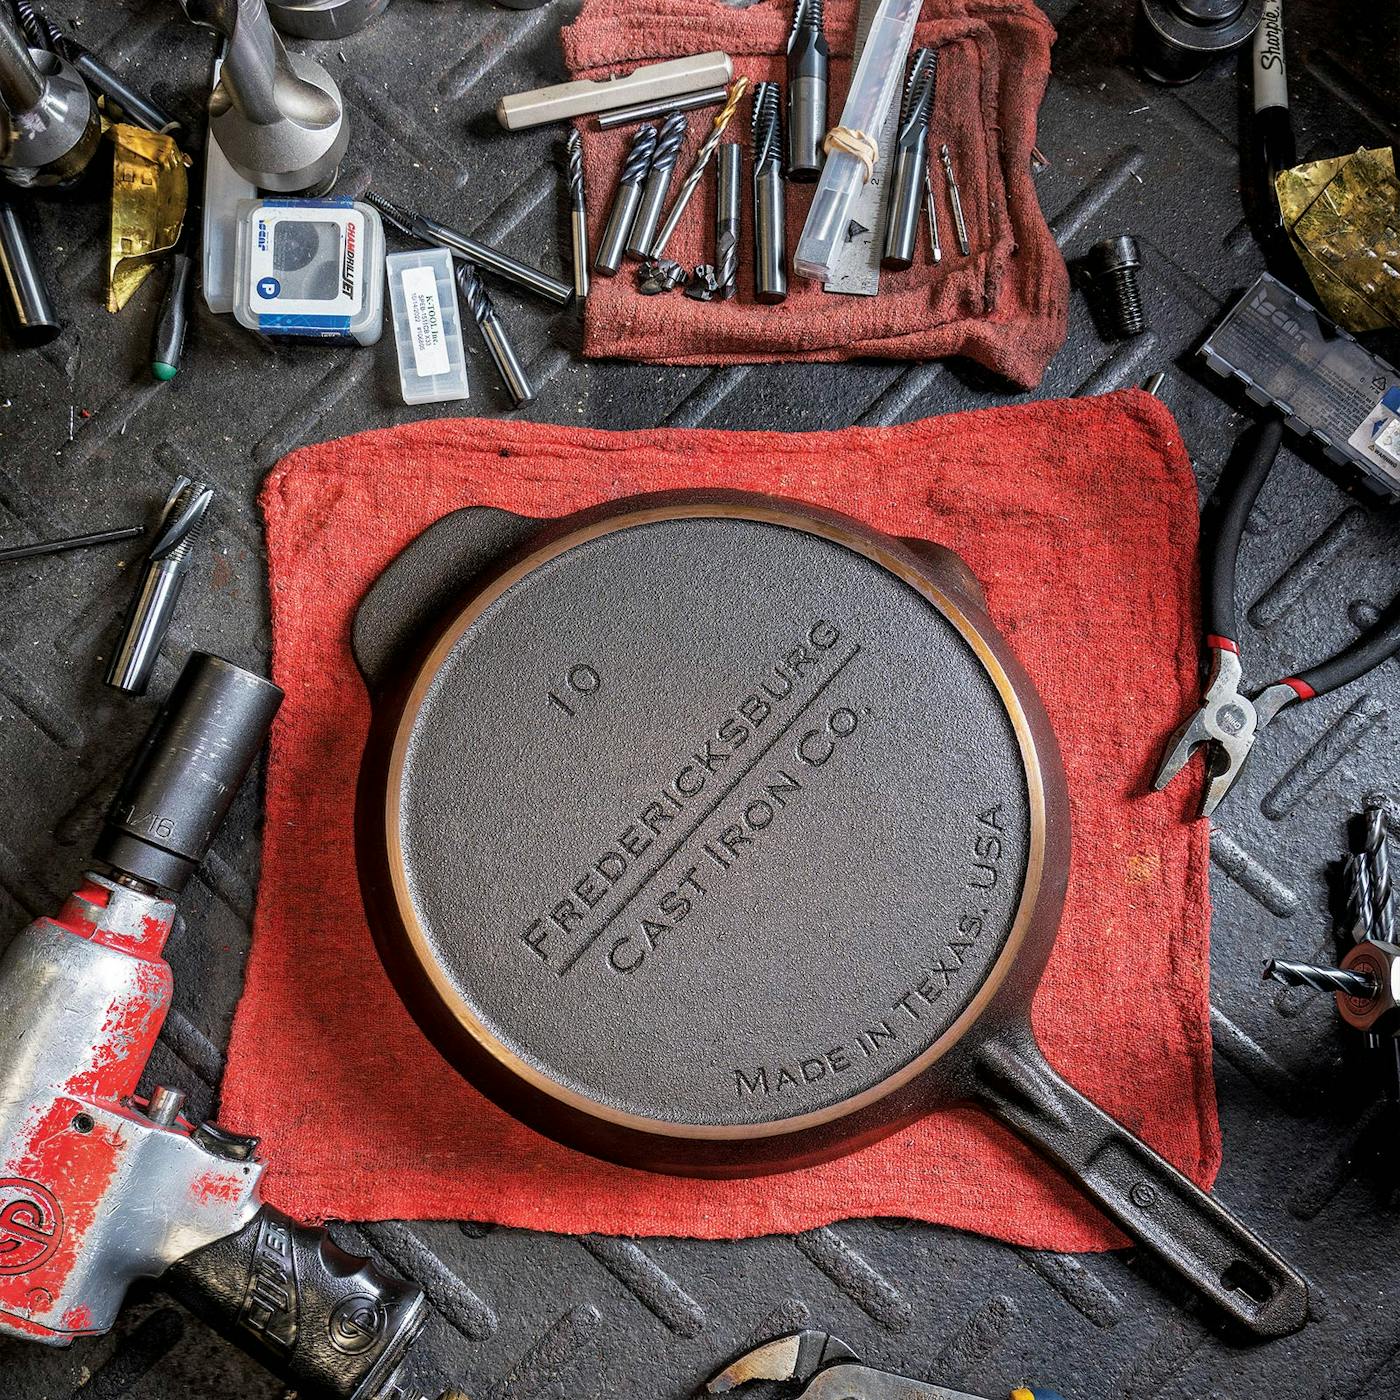 A Fredericksburg Couple Forges a New Path With Their Cast-Iron Pans